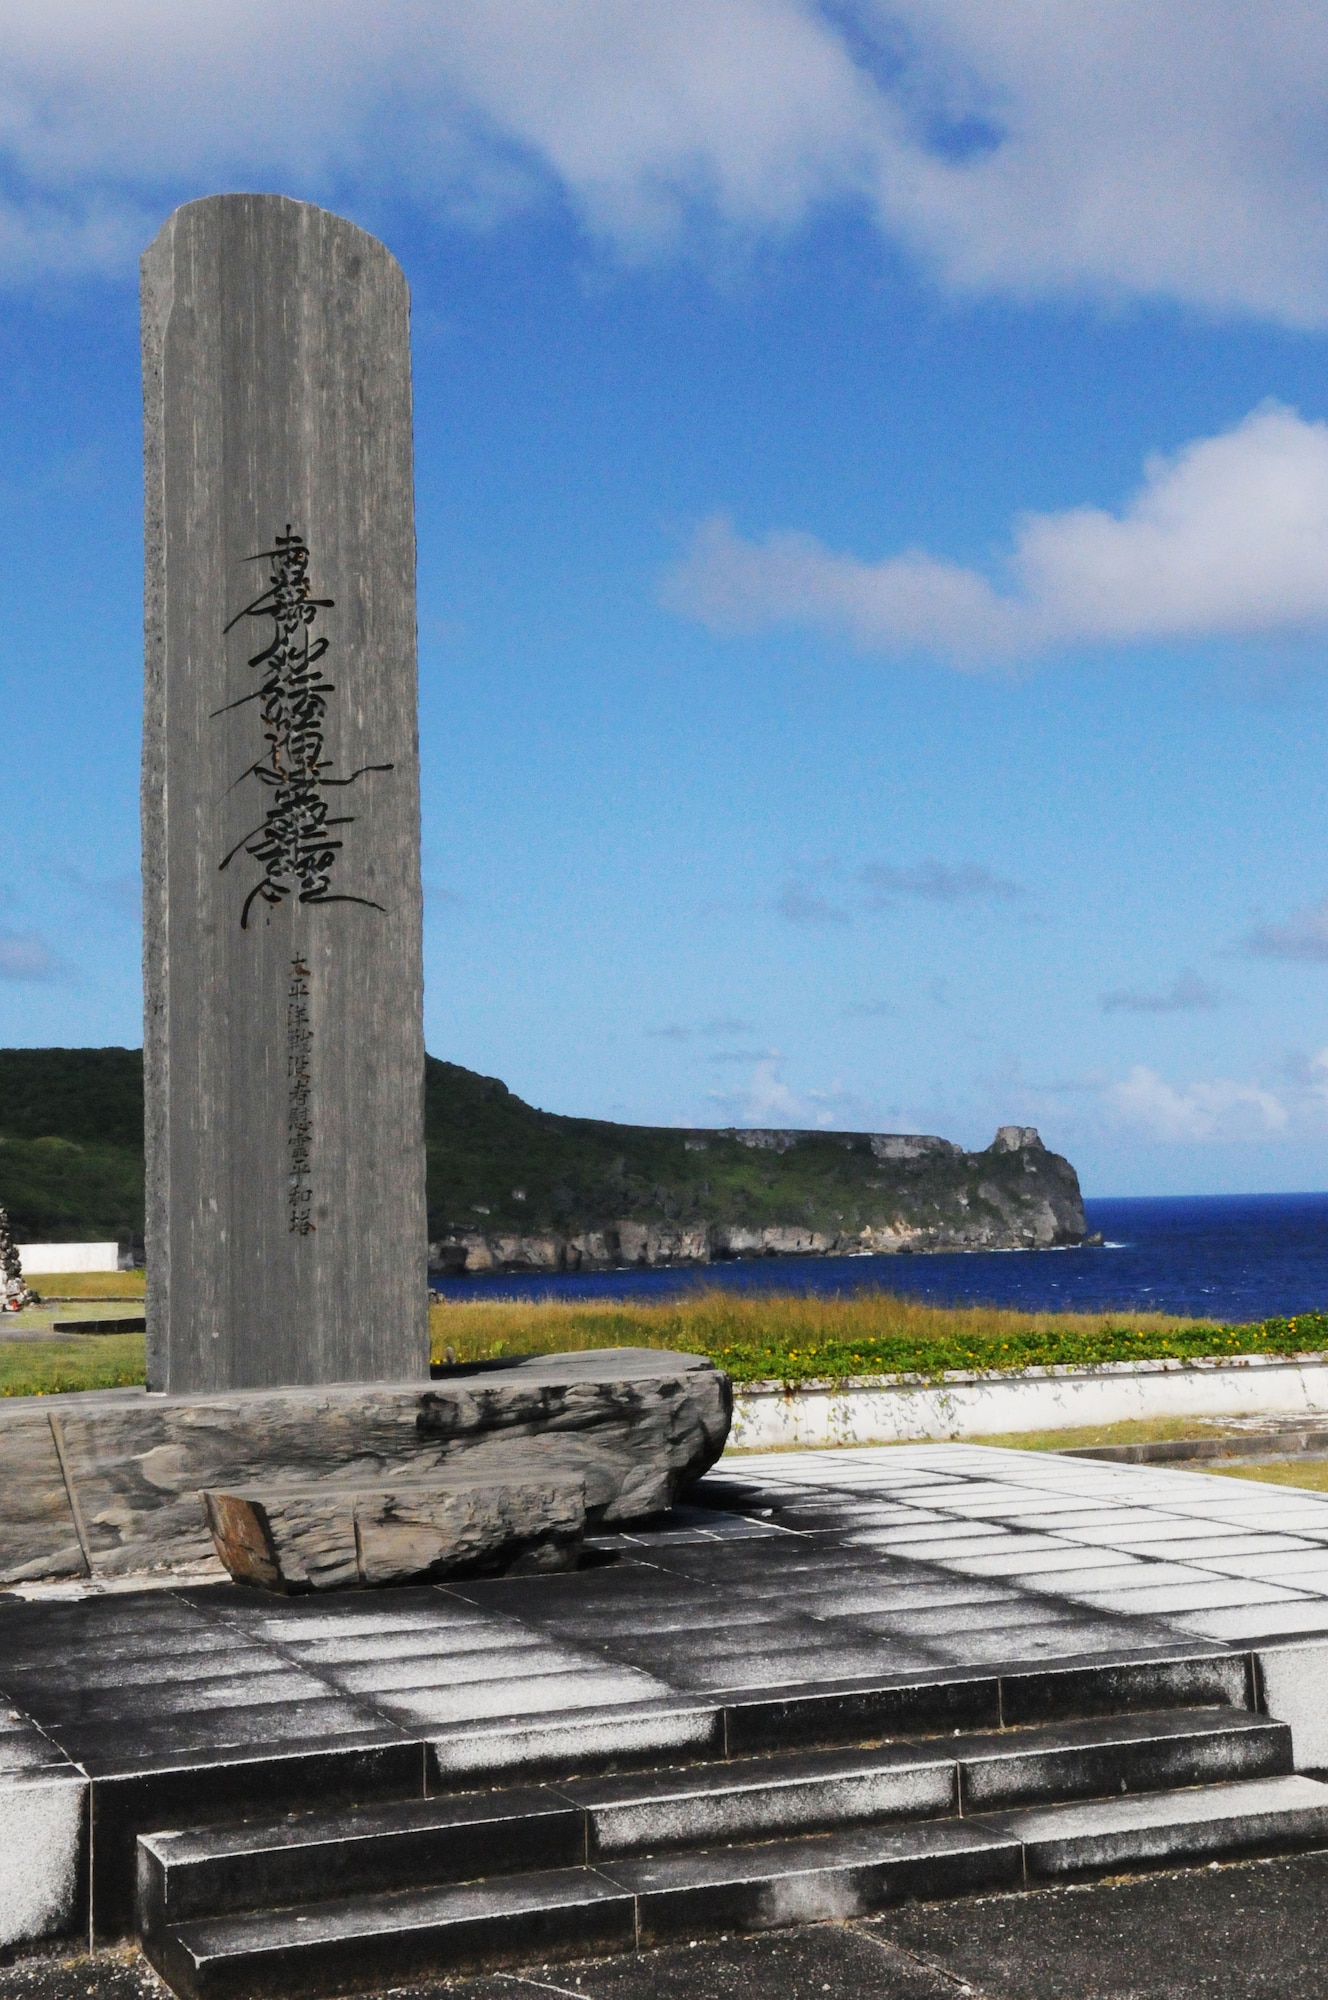 ANDERSEN AIR FORCE BASE, Guam -- A memorial honoring the lives of local
Tinian Islanders lost during World War II stands at on a cliff of the
island. Senior leadership of Team Andersen visited the memorial during a
historical tour of the island Oct. 11.  
